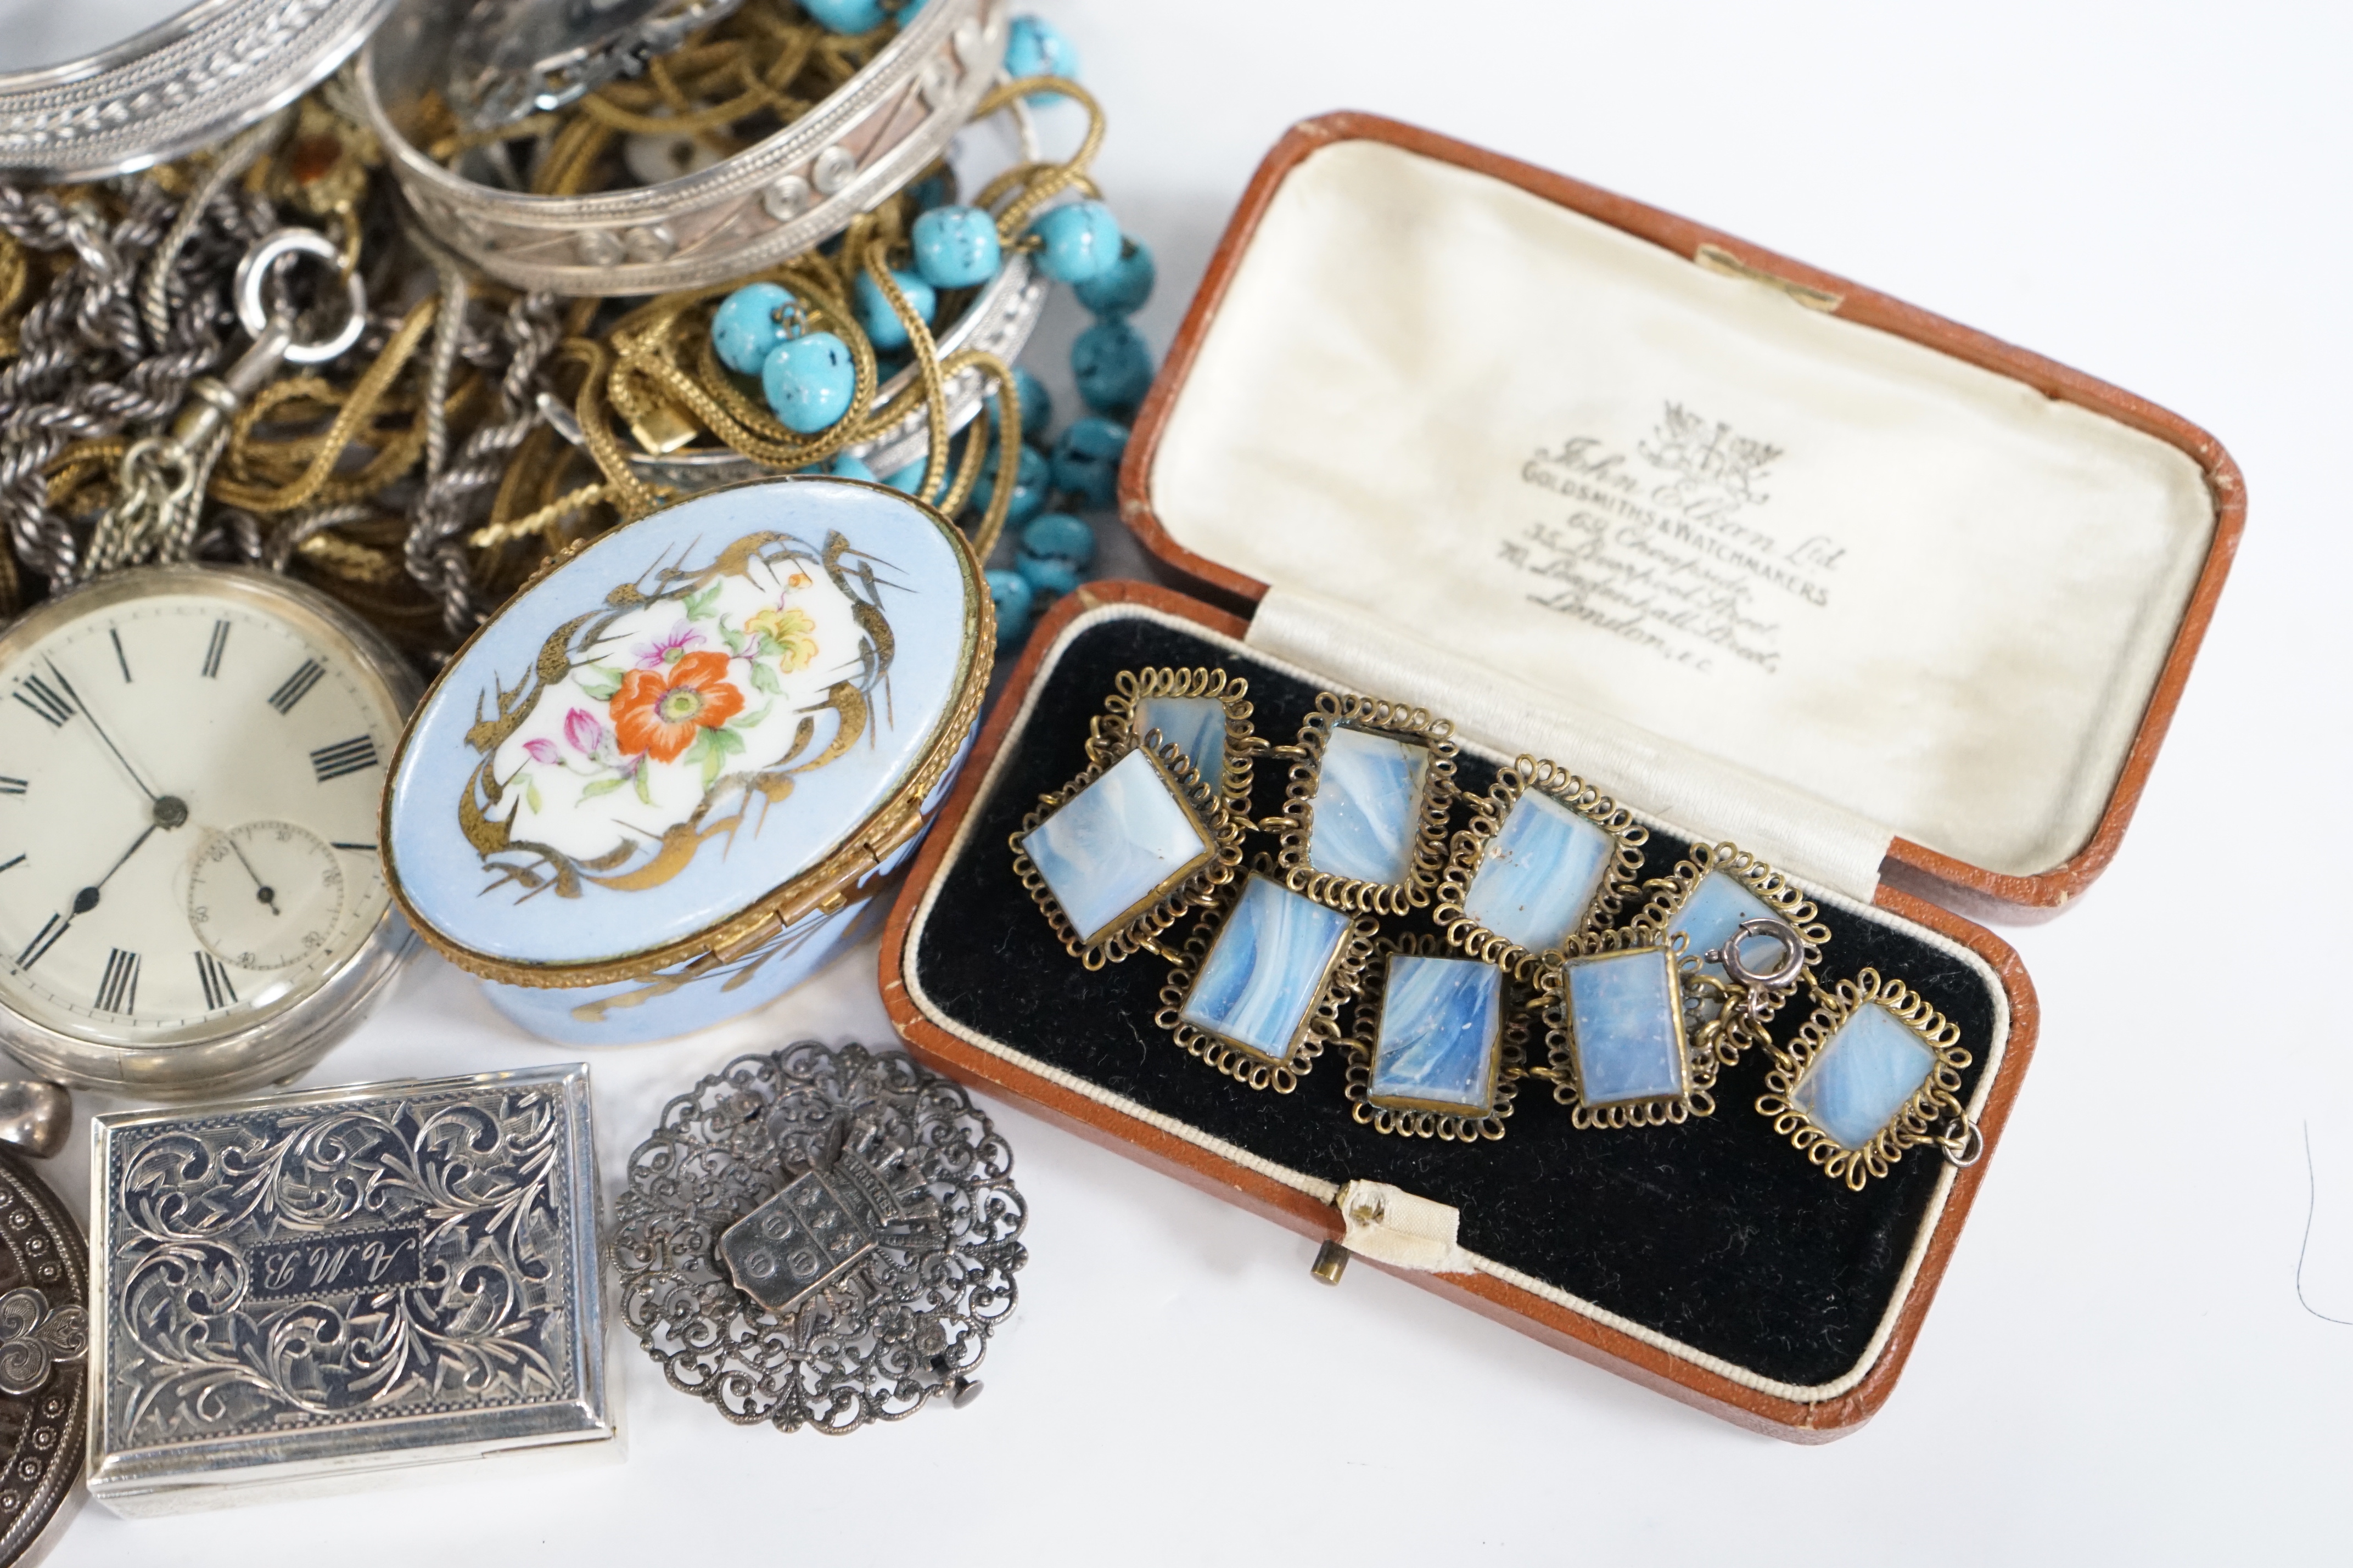 A quantity of assorted jewellery including a later Victorian silver locket and brooch, Italian 925 bracelet, chains, thimble, bangle, etc. together with a 935 white metal fob watch, a silver pocket watch and an Elgin gol